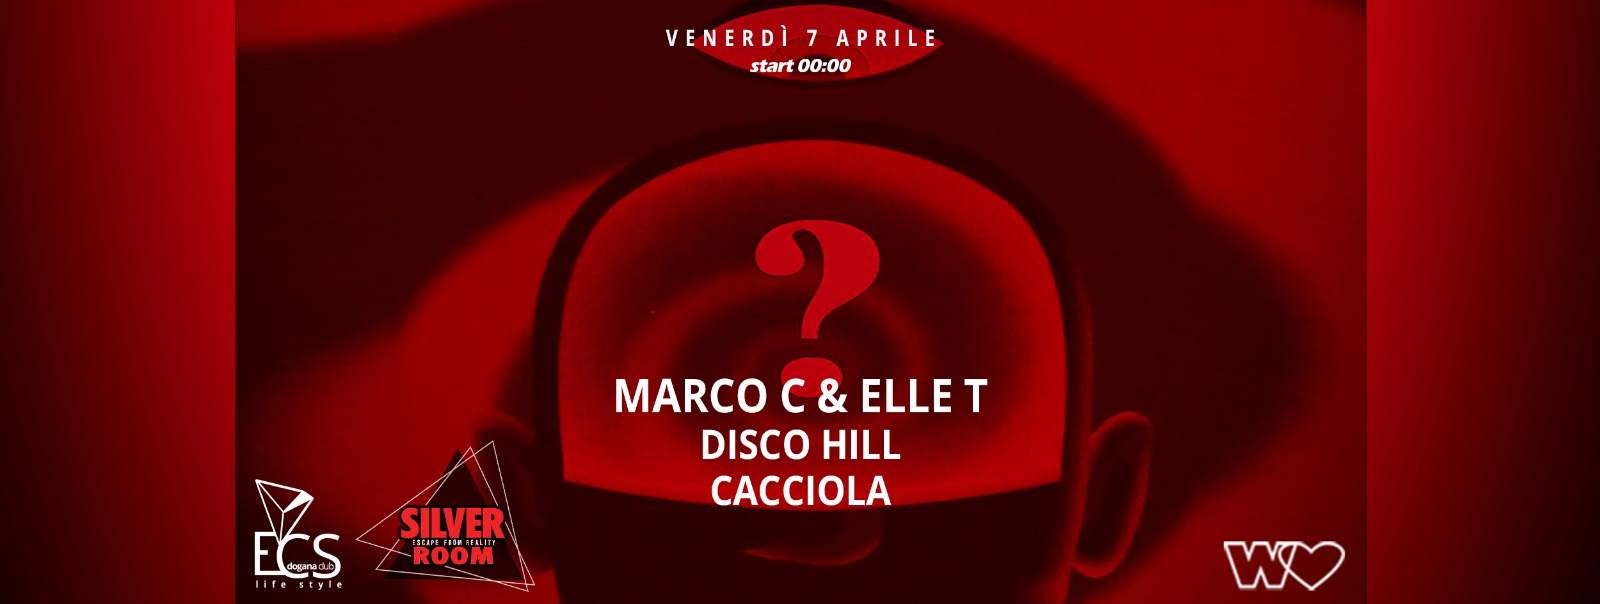 SILVER ROOM presents Marco C & Elle T - フライヤー表